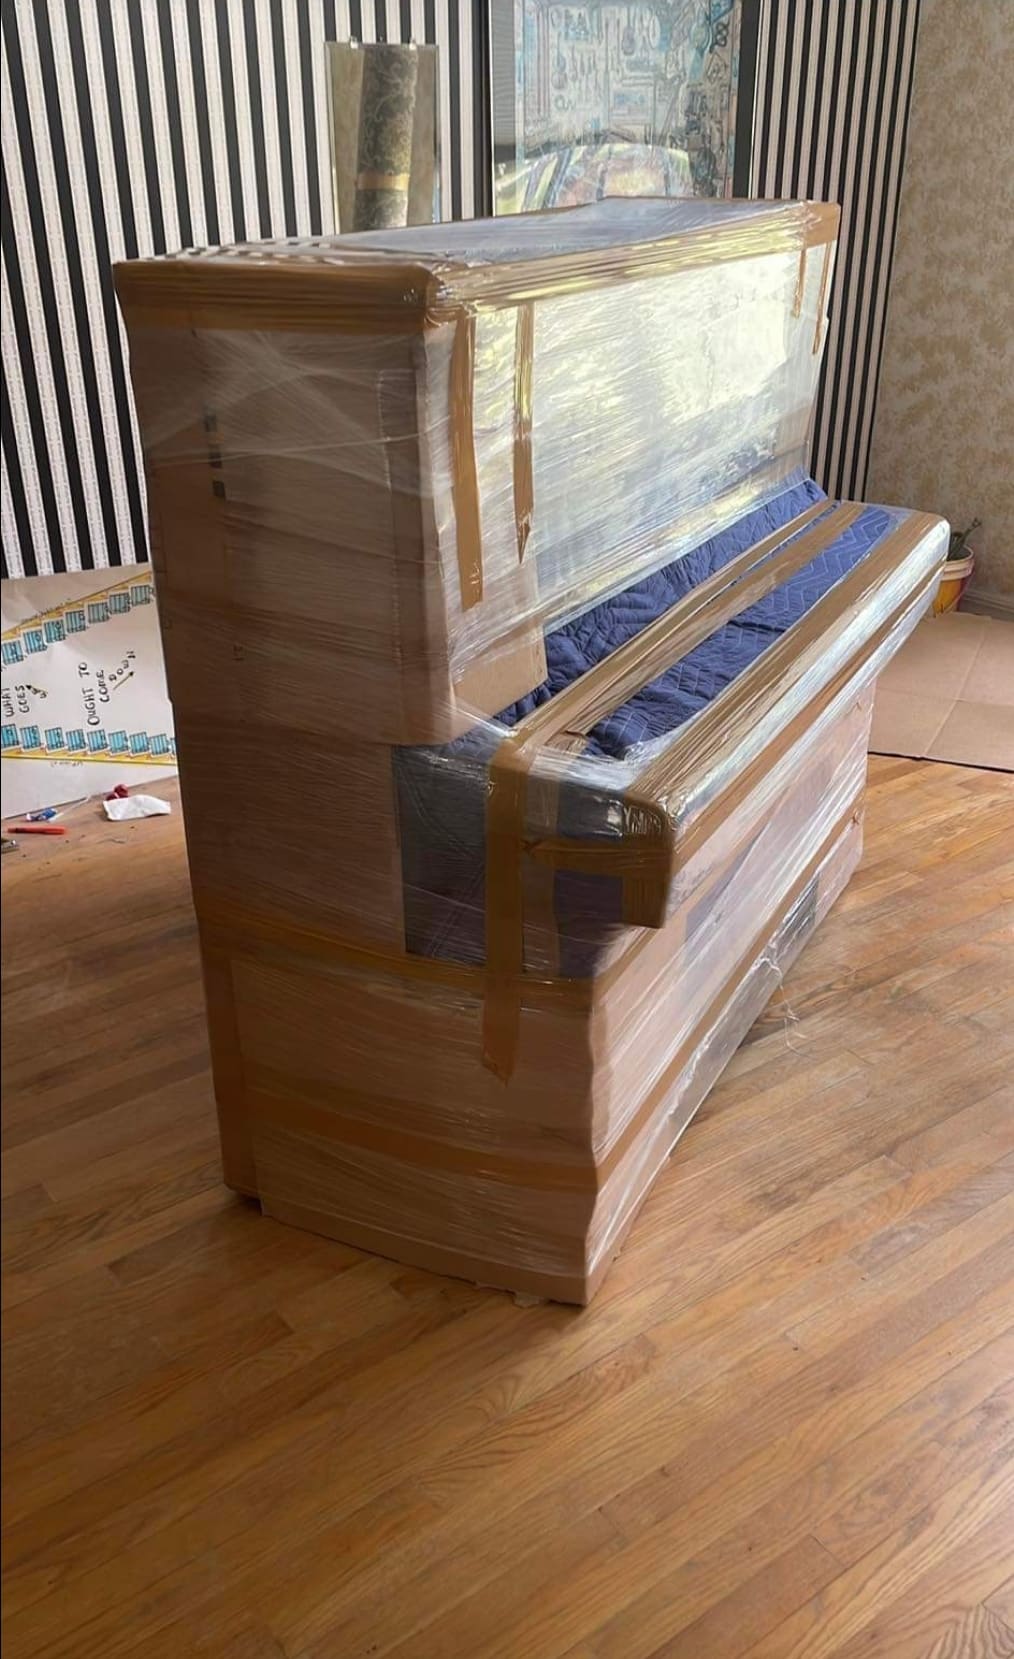 Upright piano moving